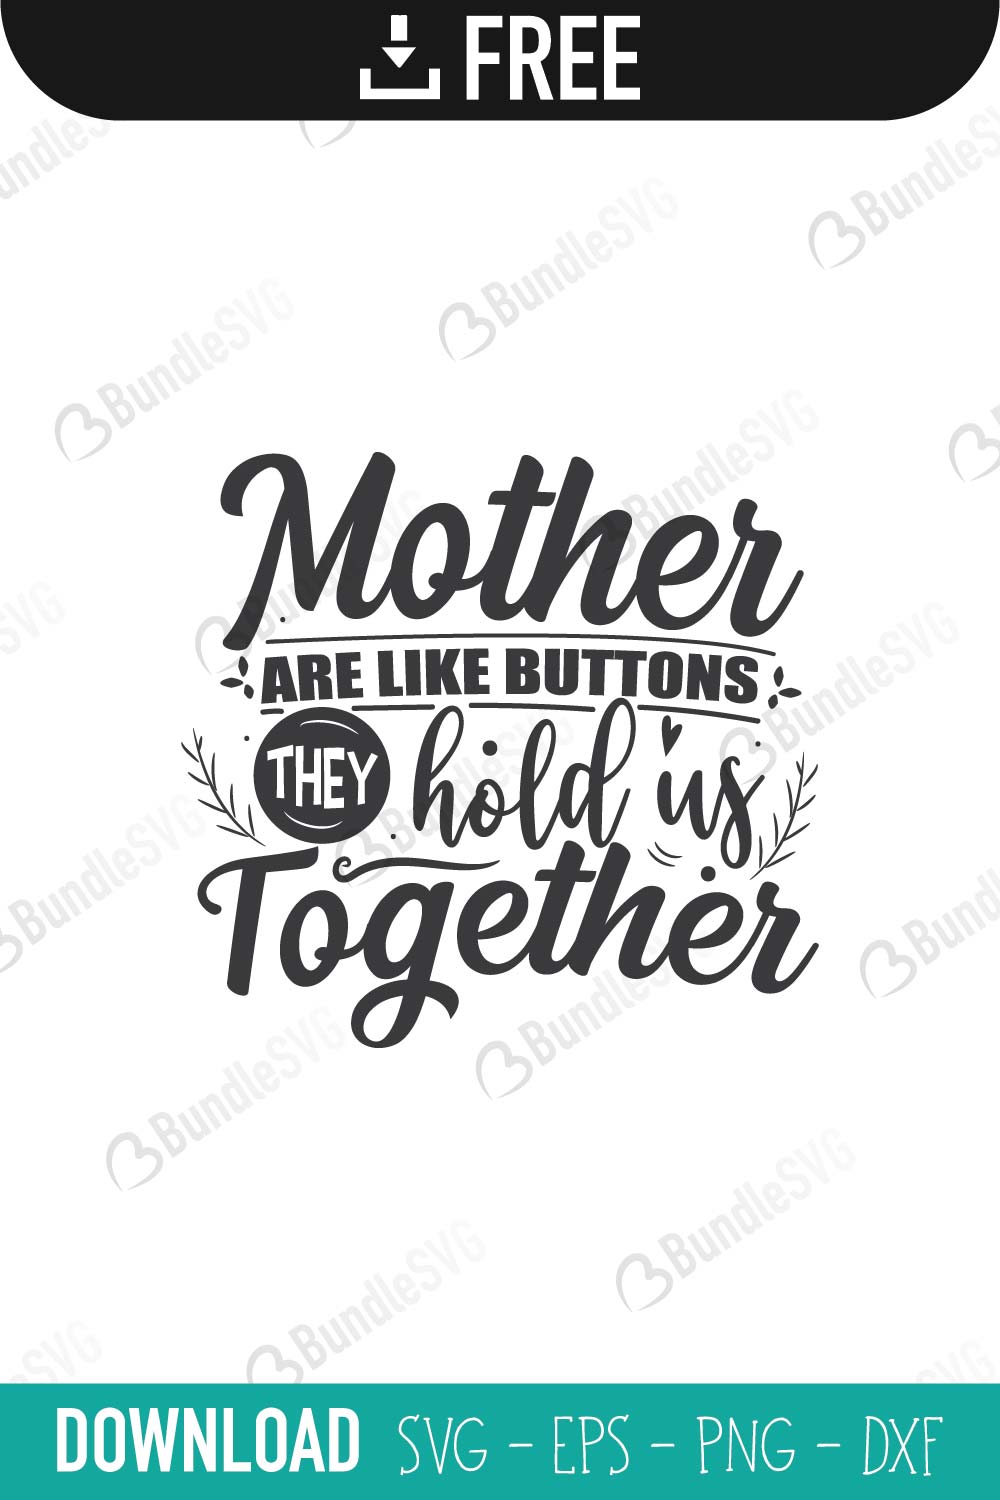 Free Free 299 Tired As A Mother Svg Free SVG PNG EPS DXF File